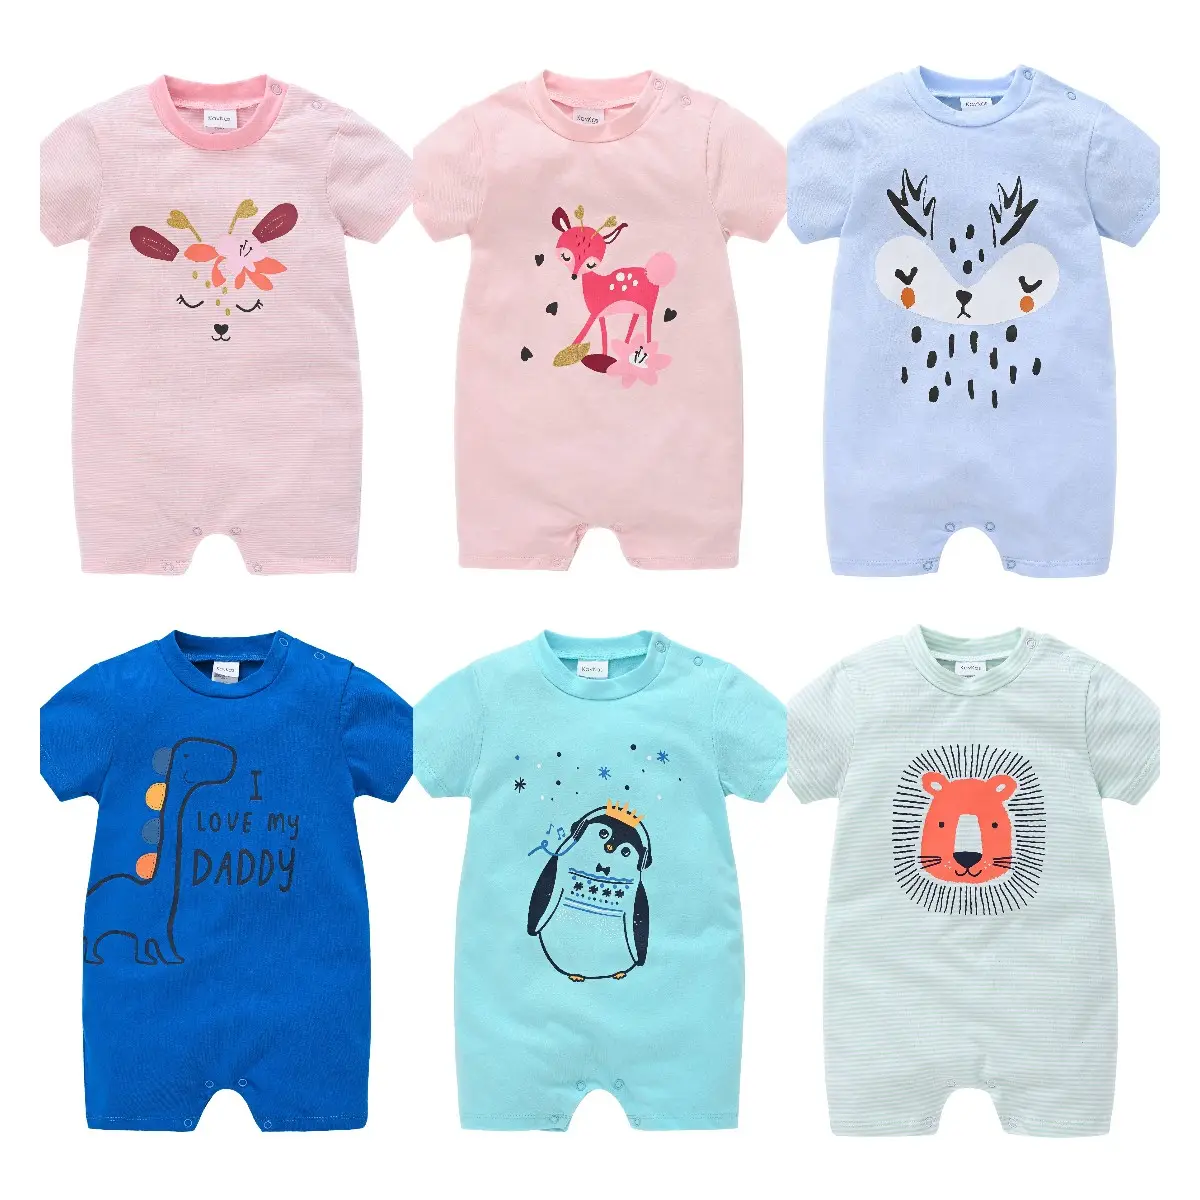 3 Months to 2 Years Old Baby Boys Girls Cute Outfits Baby Patterns Logo Toddler Shorts Onesies Kids Cotton Clothes